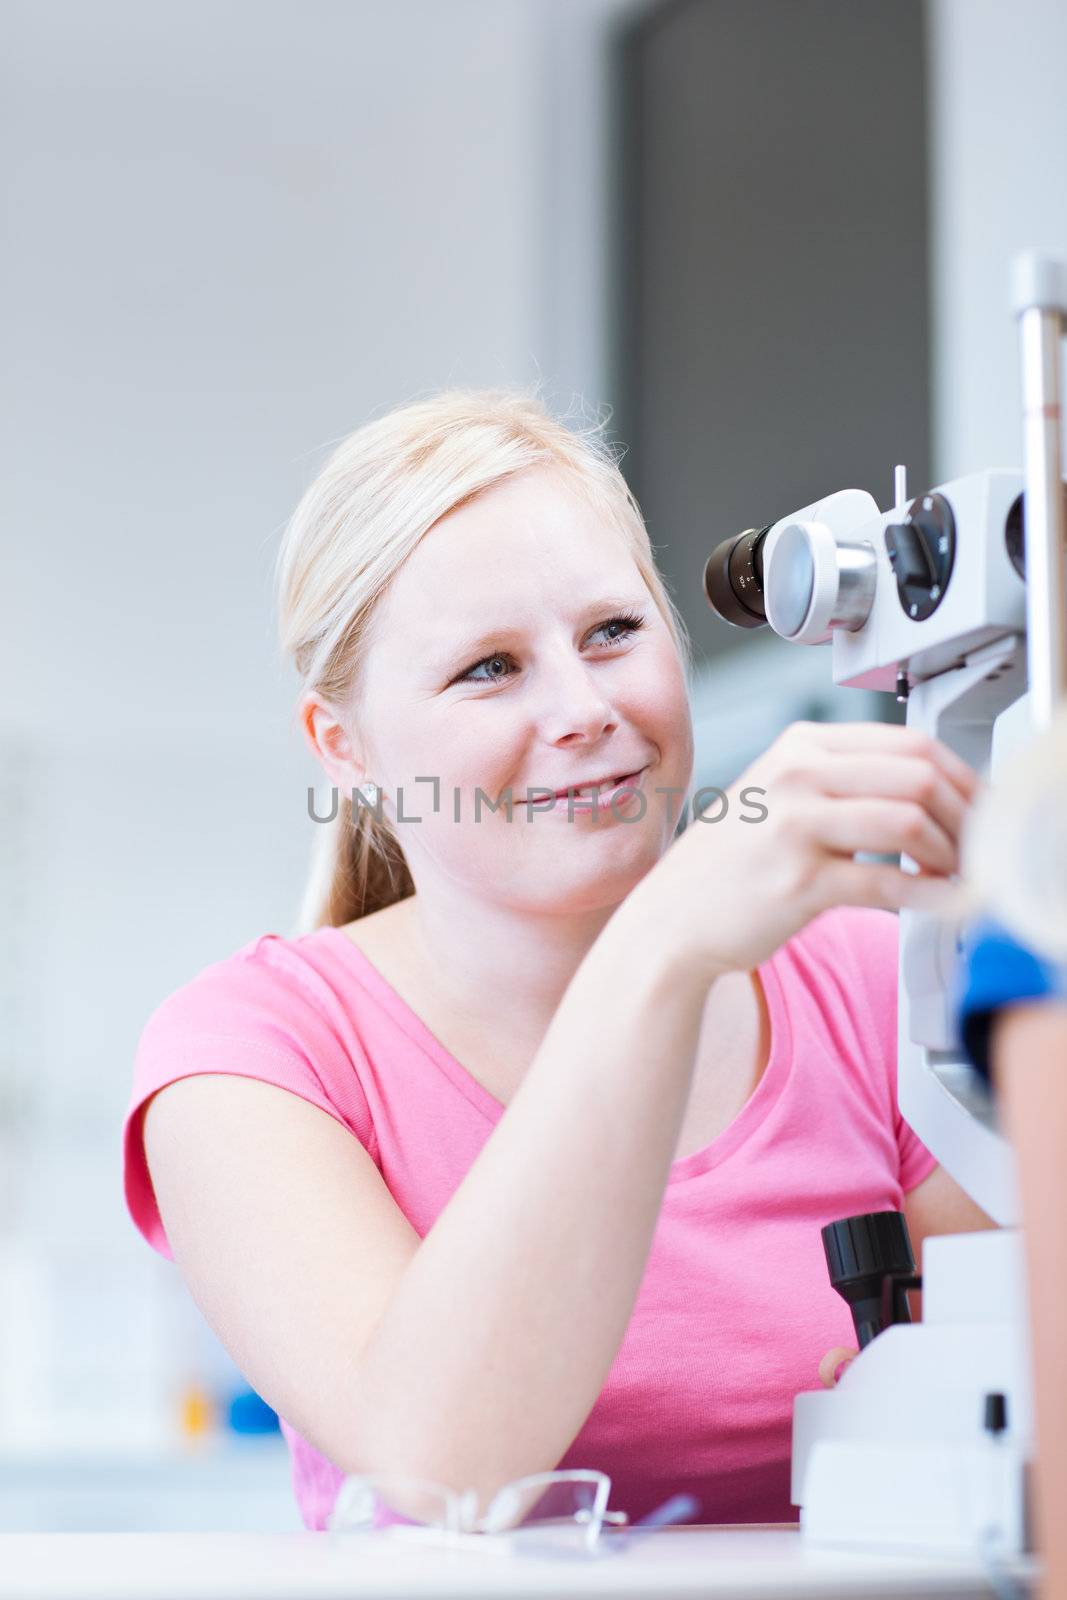 optometry concept - portrait of a young pretty optometrist using slit lamp (color toned image)